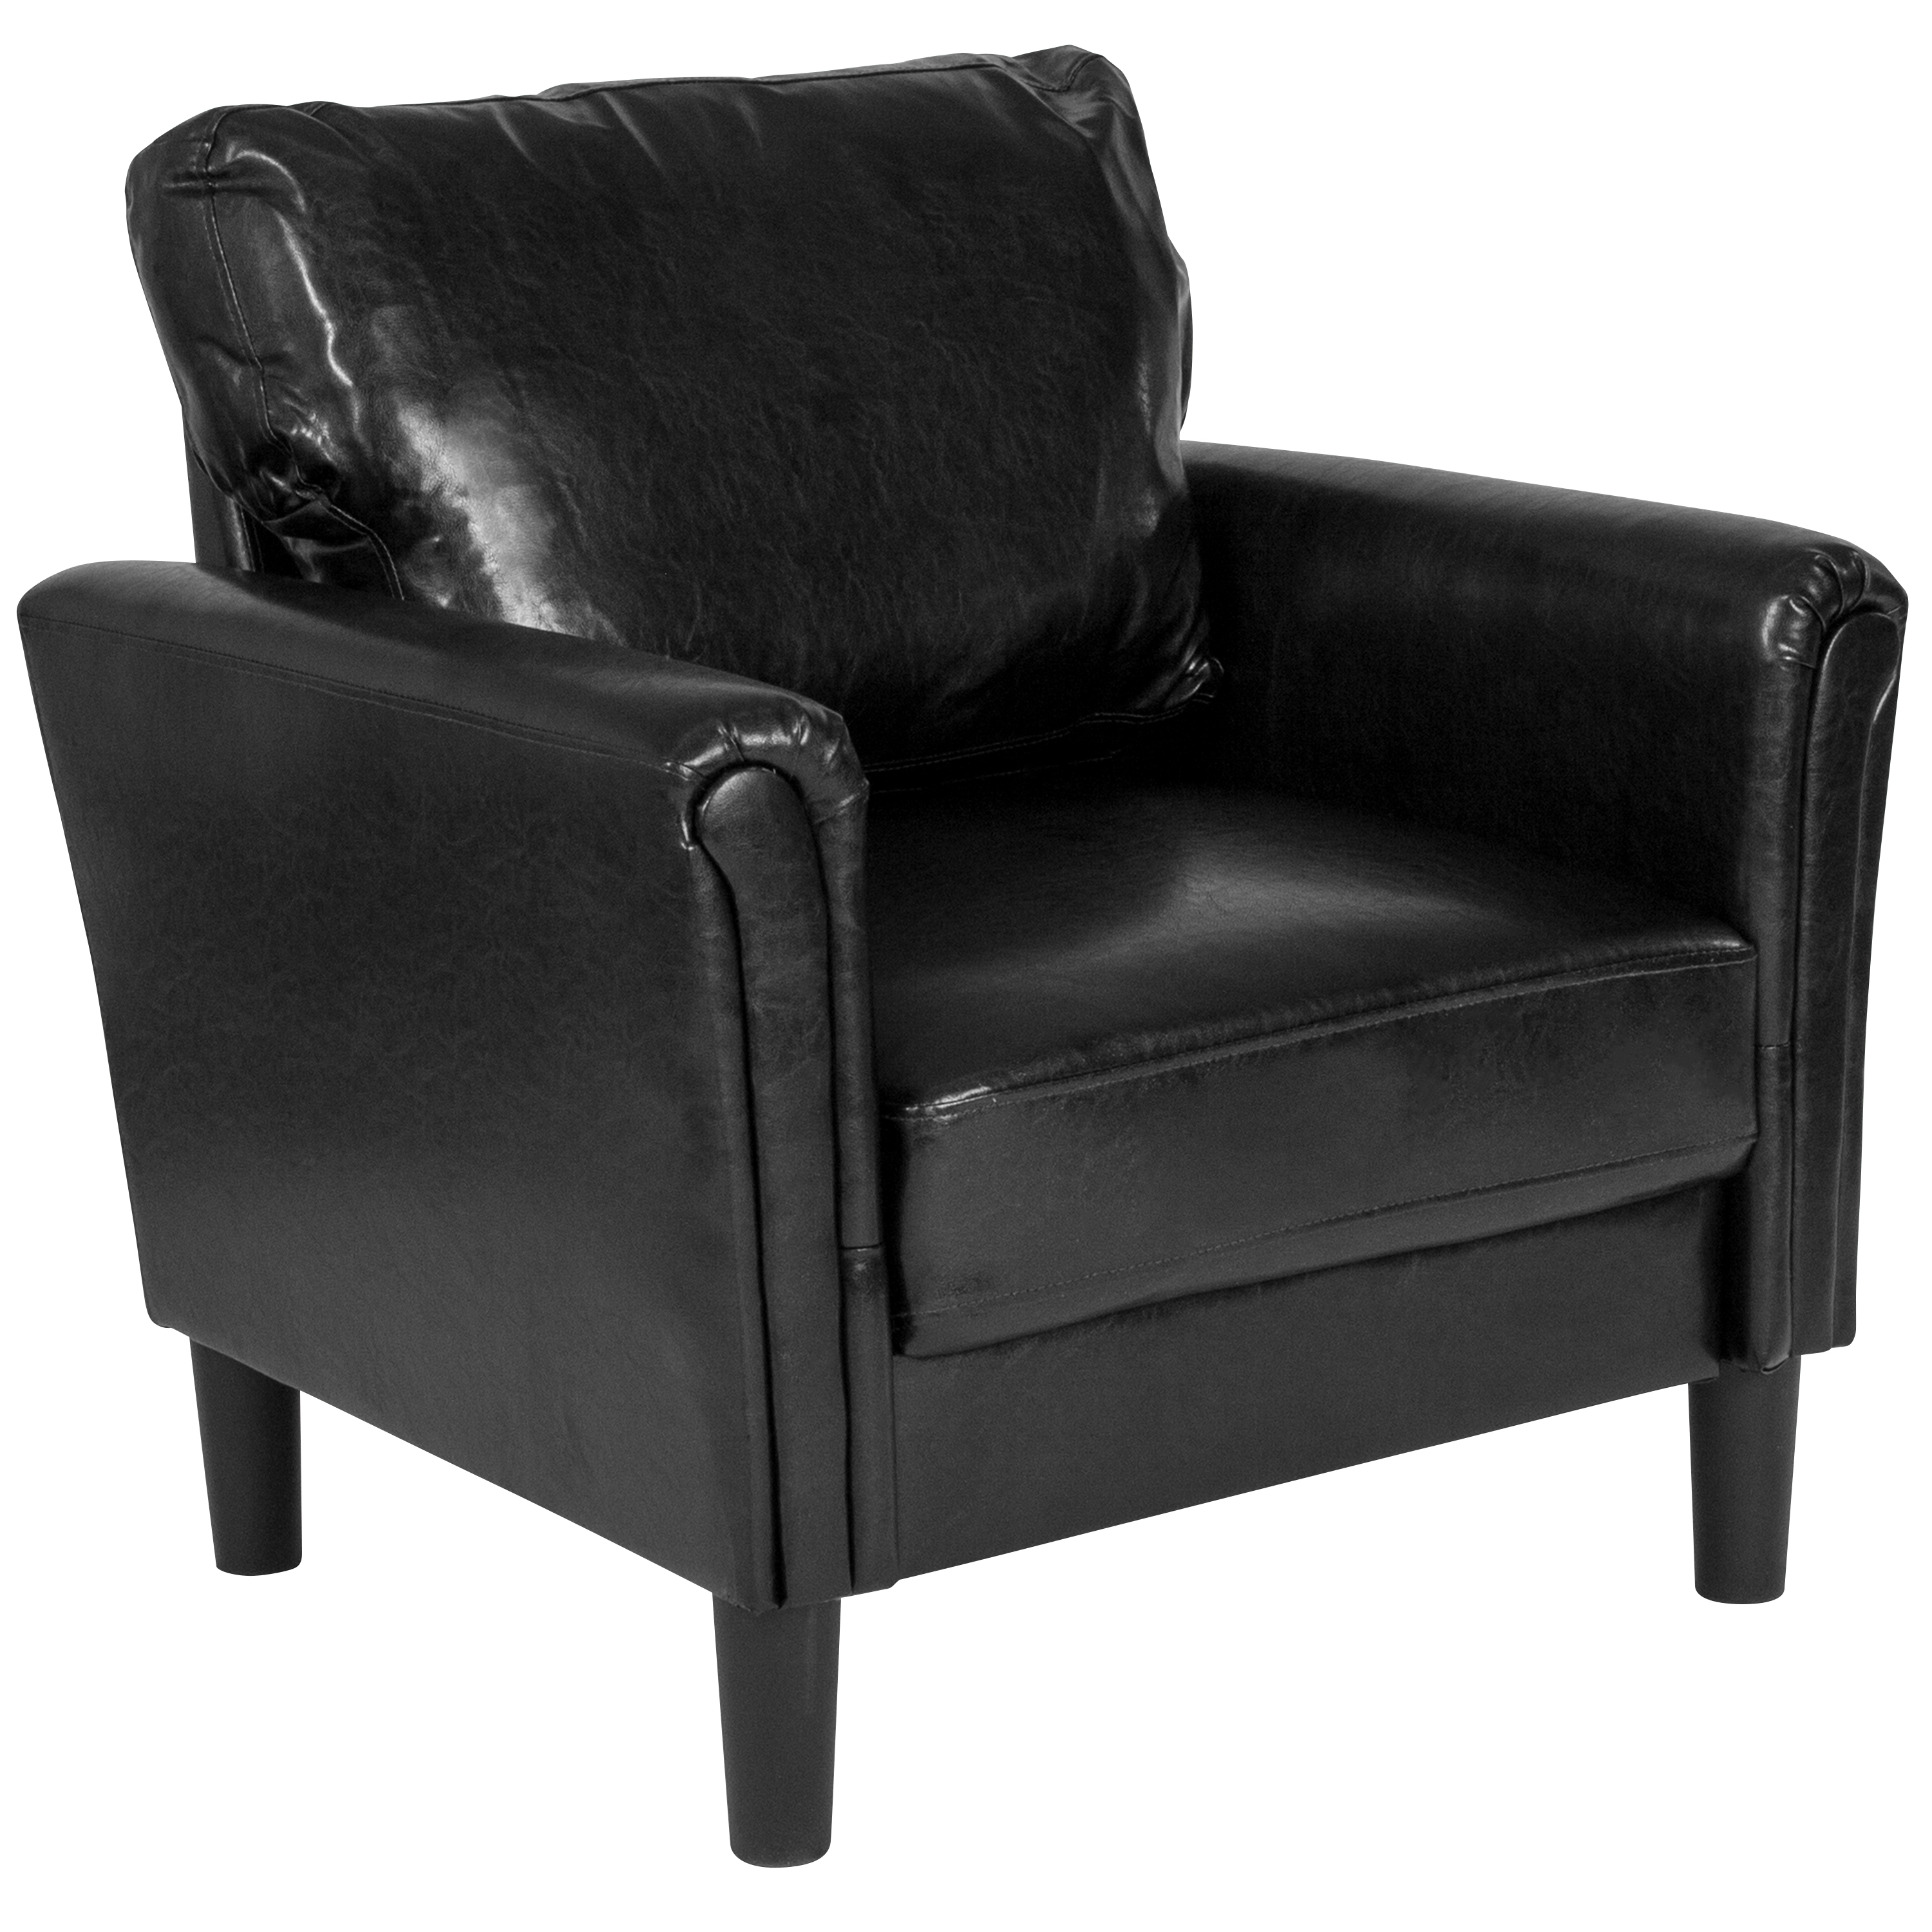 Flash Furniture Bari Upholstered Chair in Black LeatherSoft - image 1 of 5